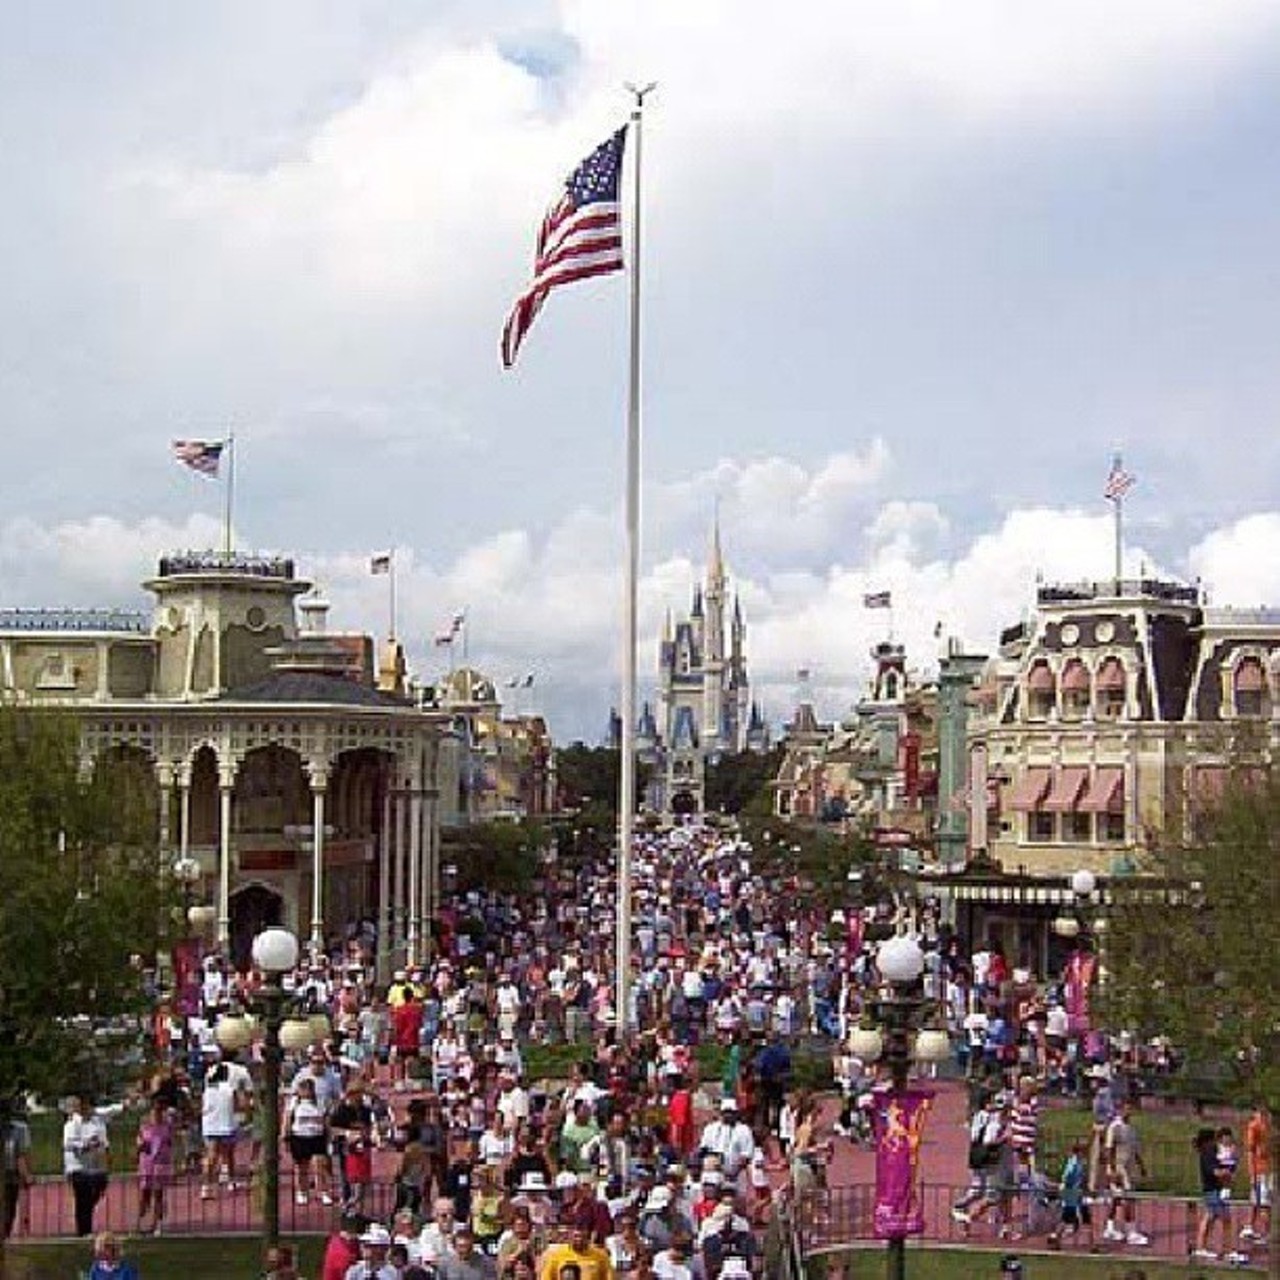 There are multiple American flags on Main Street, but only one is an accurate American flag, and that's the one in the main square. The other flags all have faults &#150; different numbers of stars or stripes &#150; so they don't have to be illuminated at night or taken down after dark.